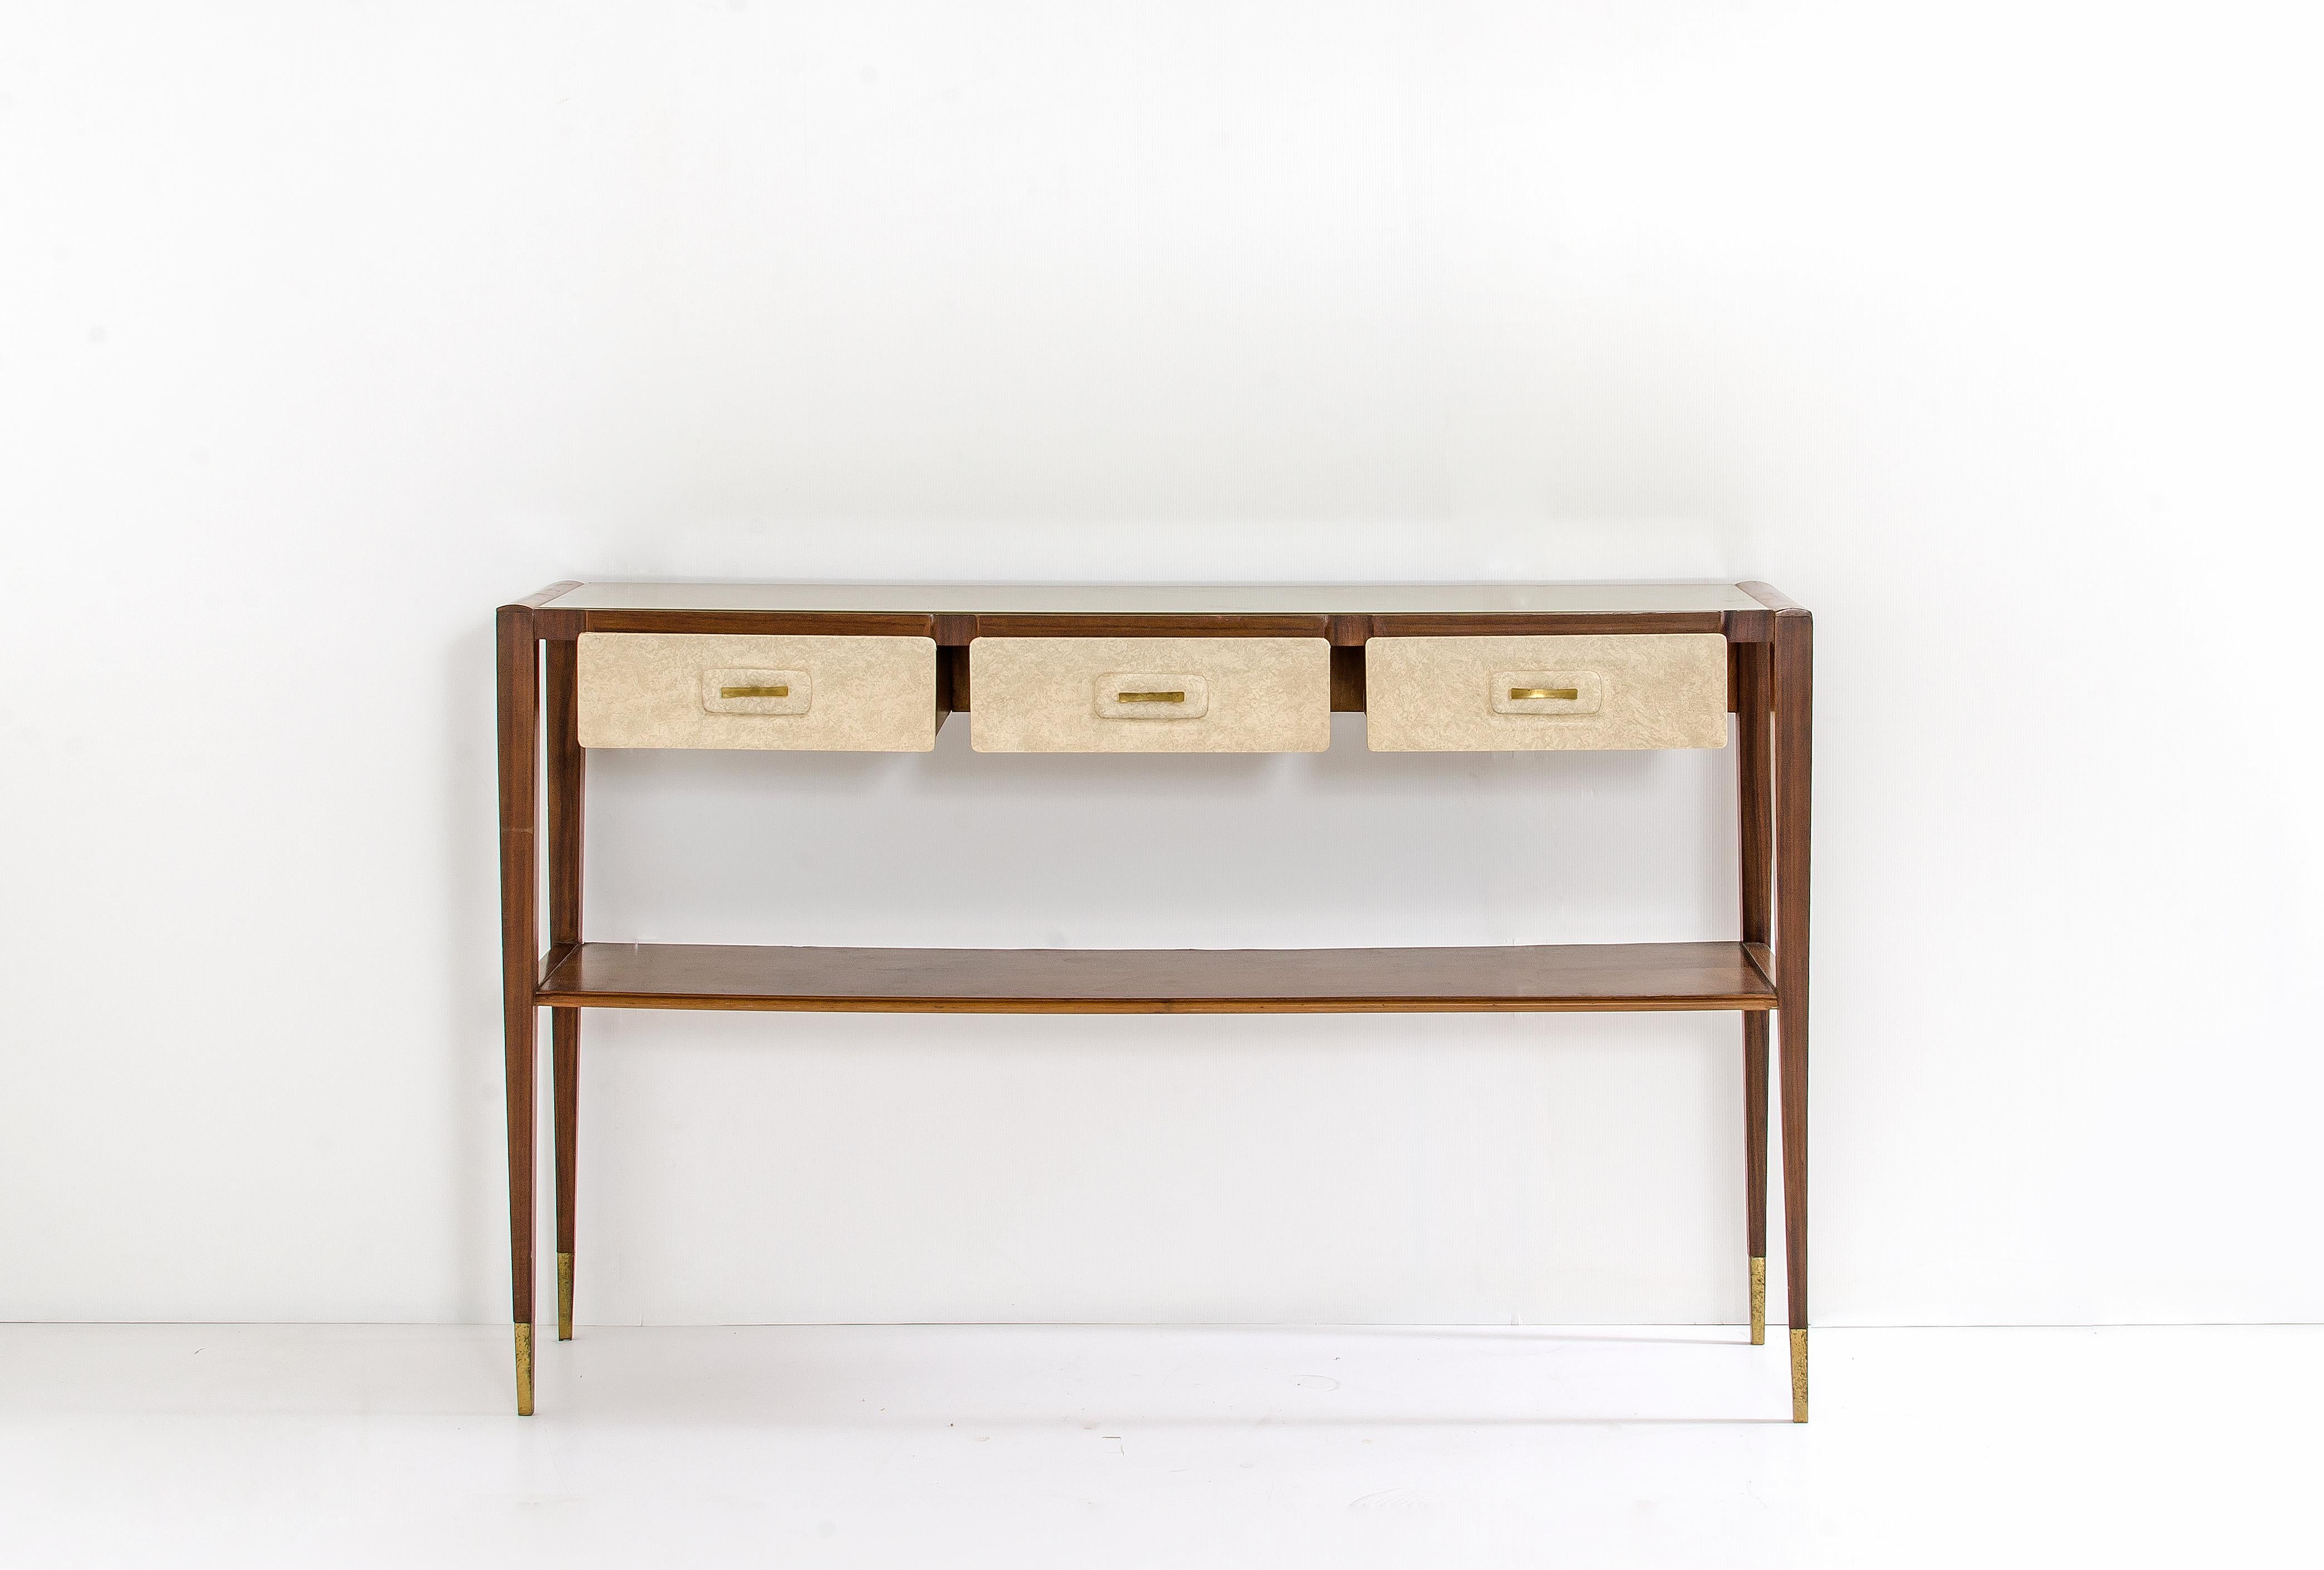 20th Century Vintage Wooden Console by Italian Architect and Designer Giò Ponti, 1950s